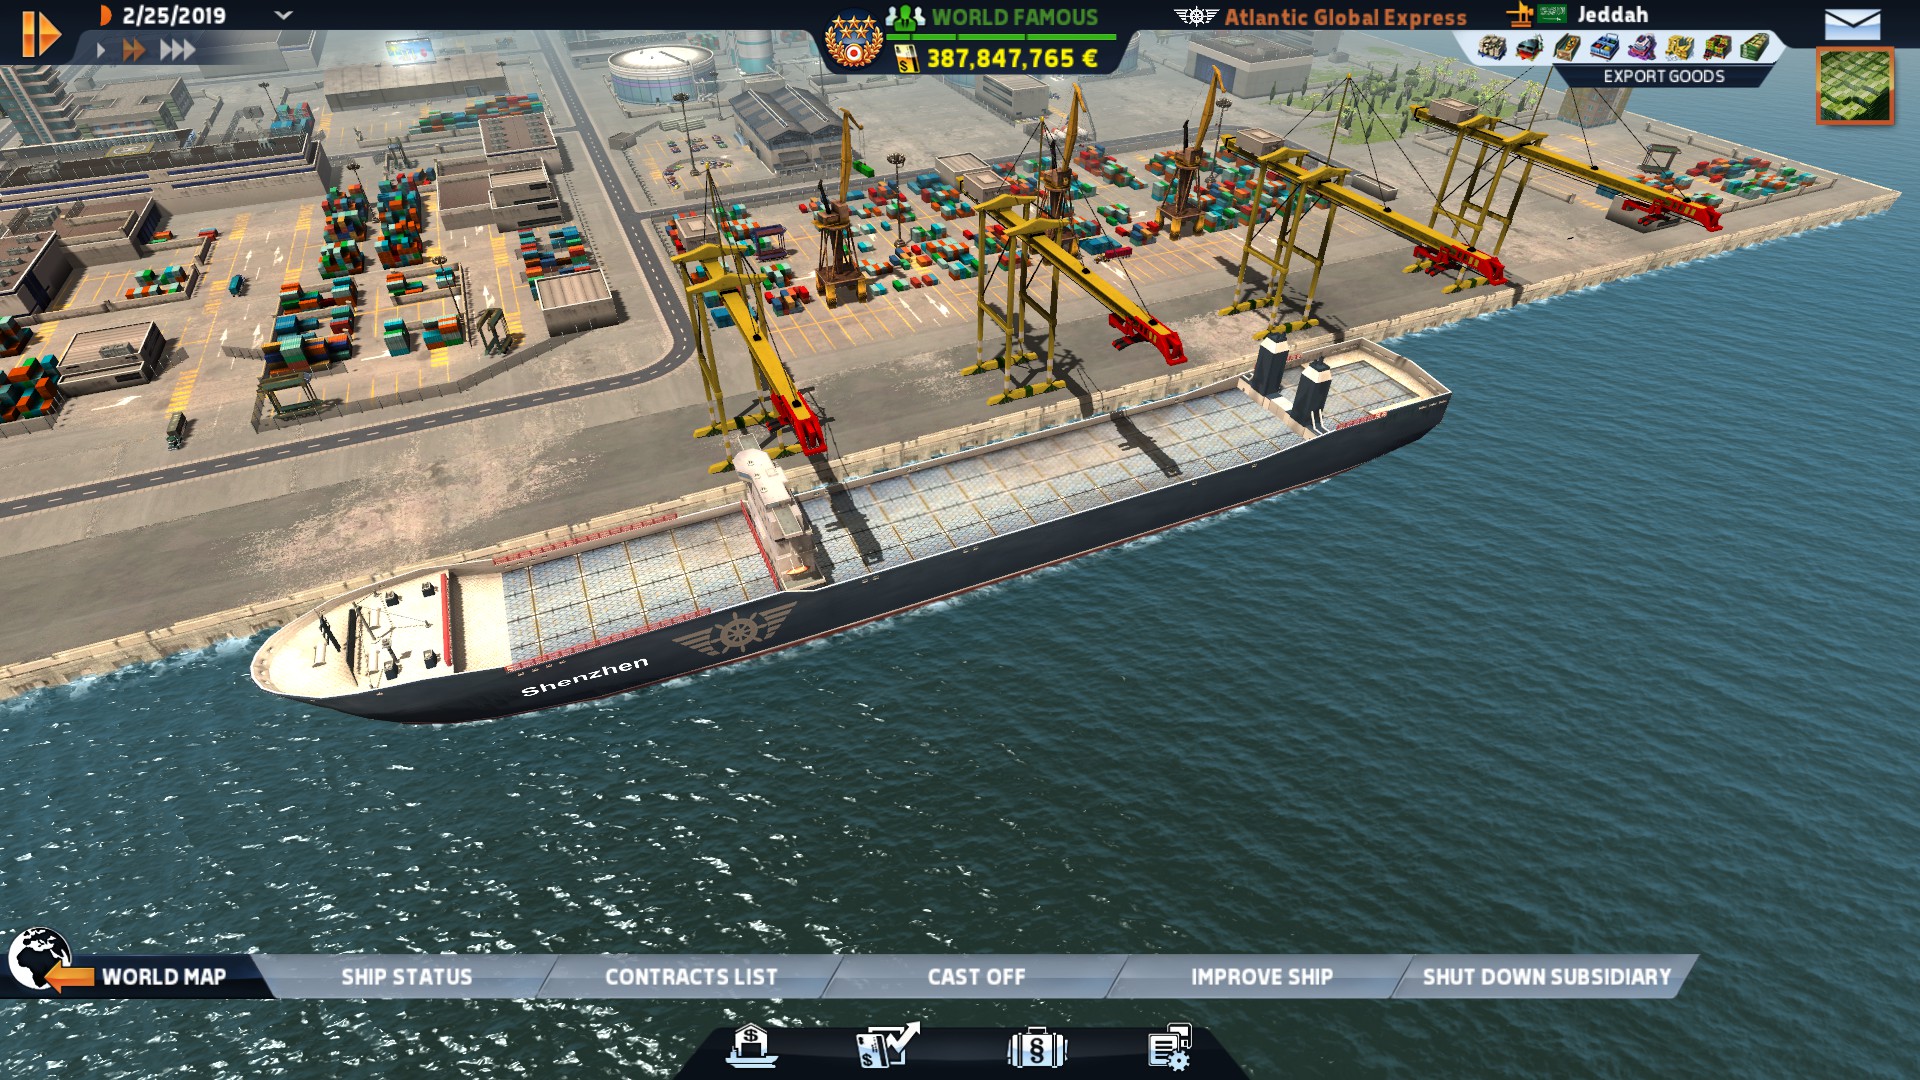 Steam Community :: Guide :: TransOcean - The Shipping Company: Ship List